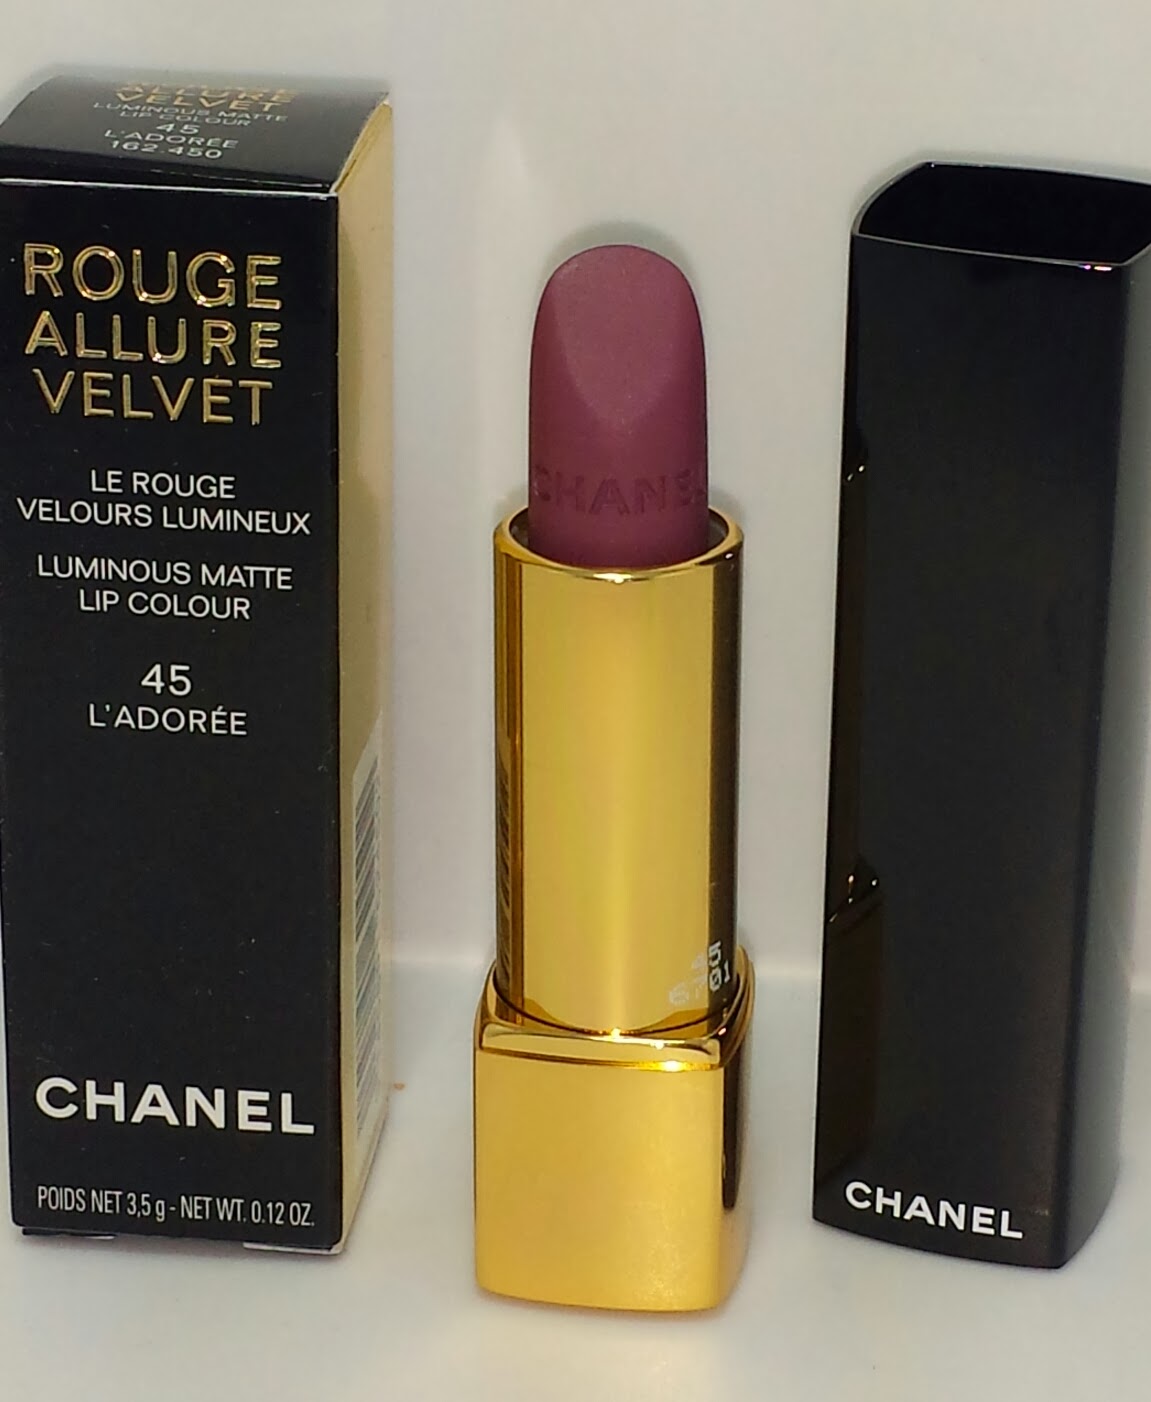 Jayded Dreaming Beauty Blog : 45 L'ADOREE CHANEL ROUGE ALLURE VELVET  LUMINOUS MATTE LIP COLOUR - SWATCHES AND REVIEW